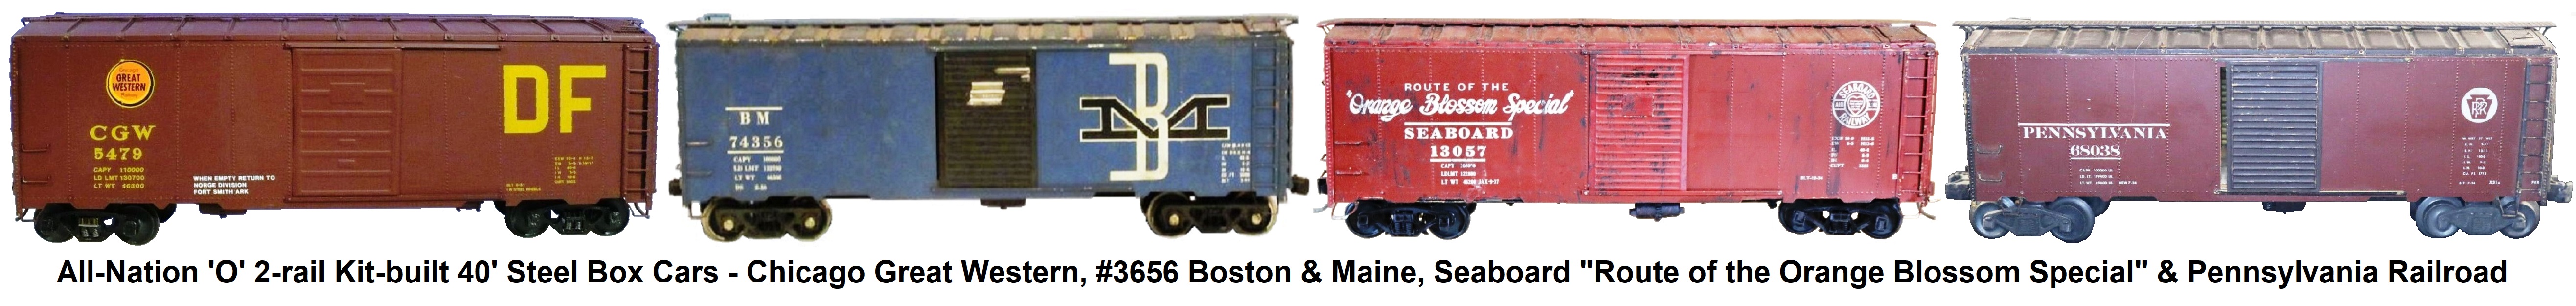 All-Nation 'O' scale 2-rail Kit-built 40' Steel Box Cars - Baltimore & Ohio, Great Northern, Chicago & North Western and New York Central